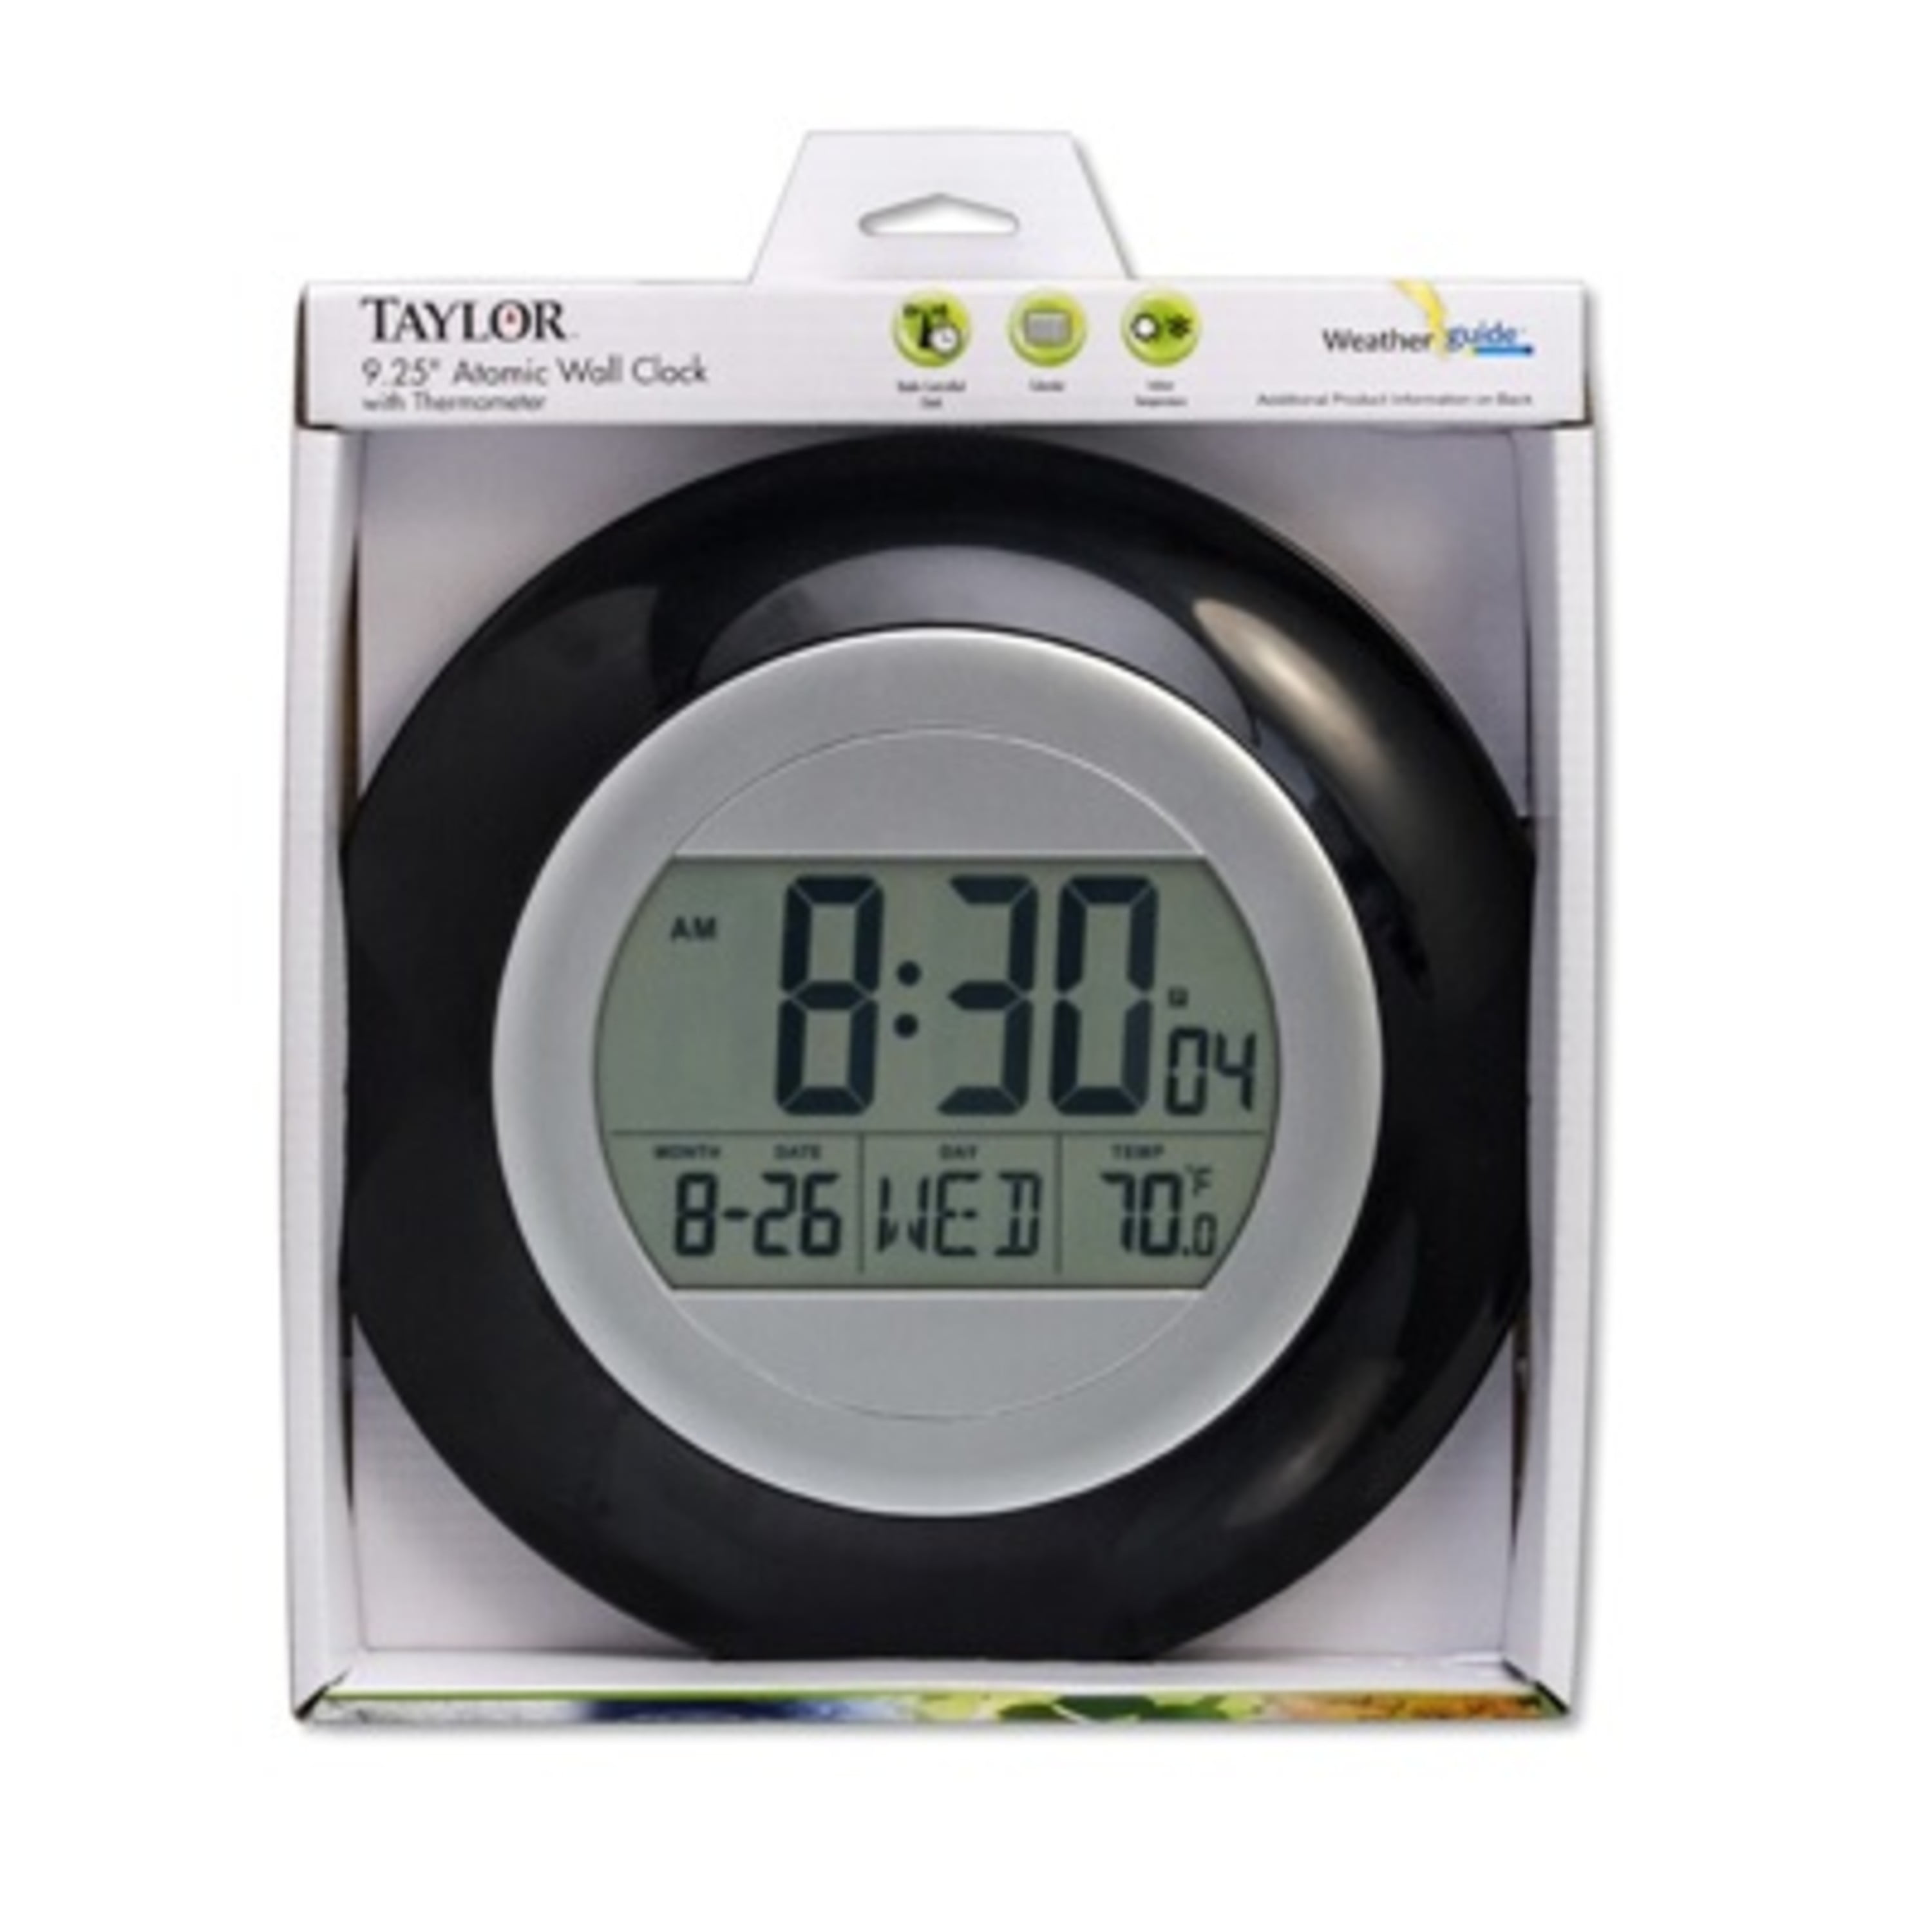 Taylor 9.25-inch Indoor Atomic Clock with Thermometer in White